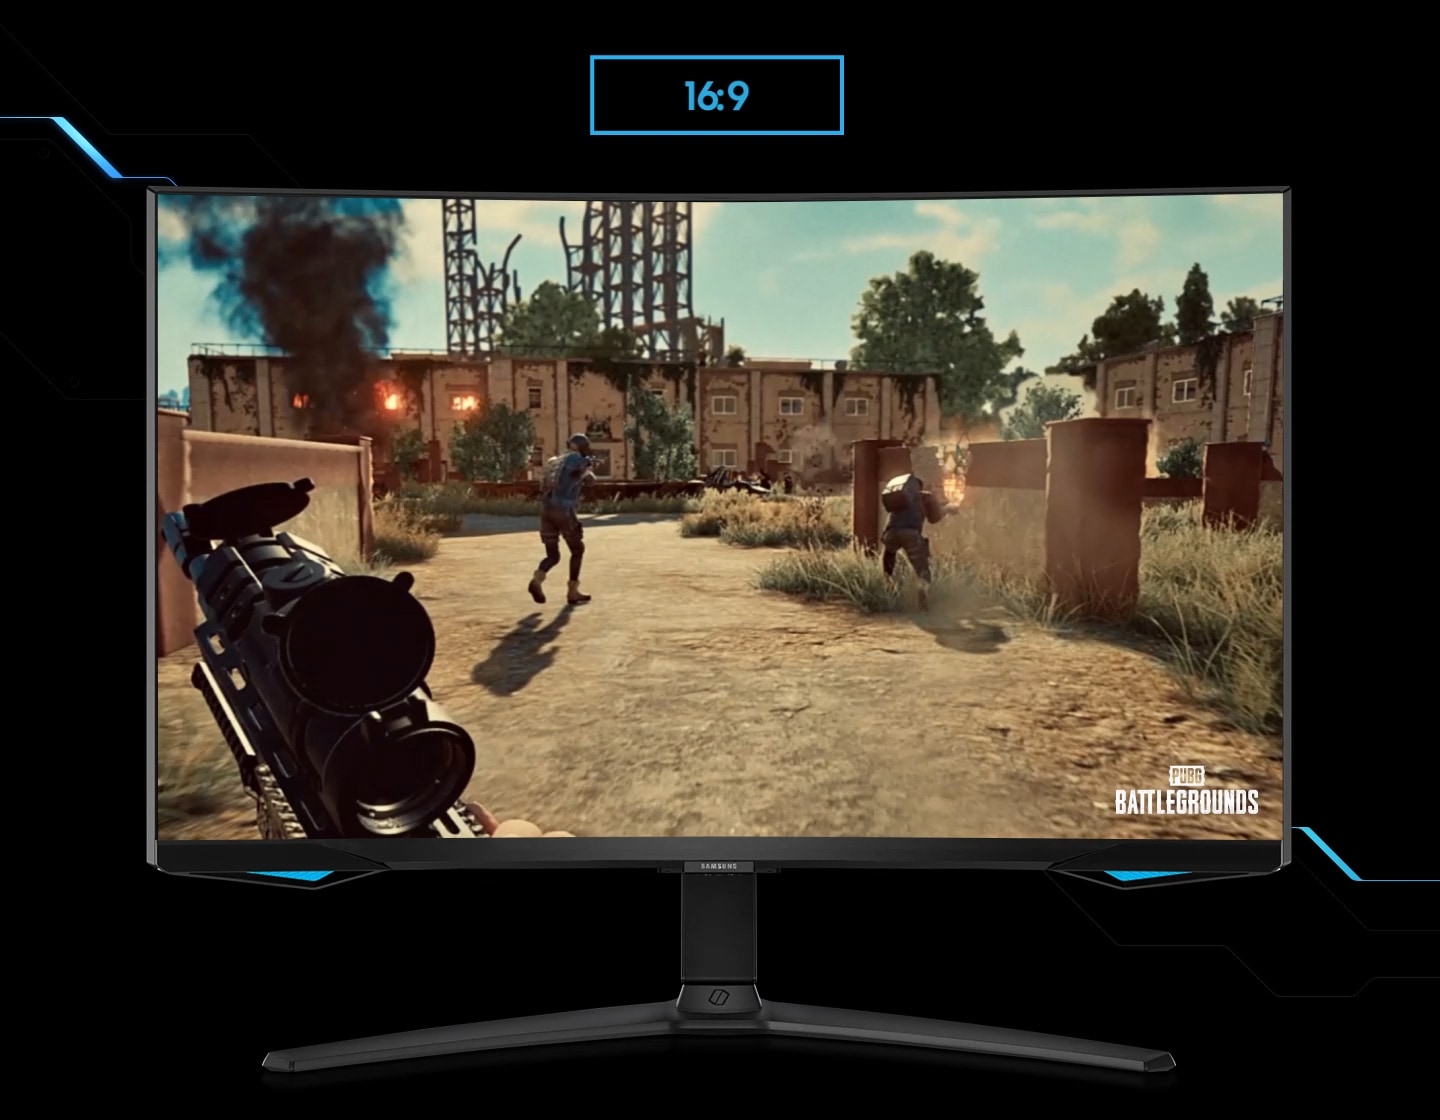 A monitor shows the perspective of a player within a first-person action game. As the screen is extended from 16:9 to 21:9 proportion, an enemy appears in the far left corner, revealed thanks to the monitor's wider perspective. The game title 